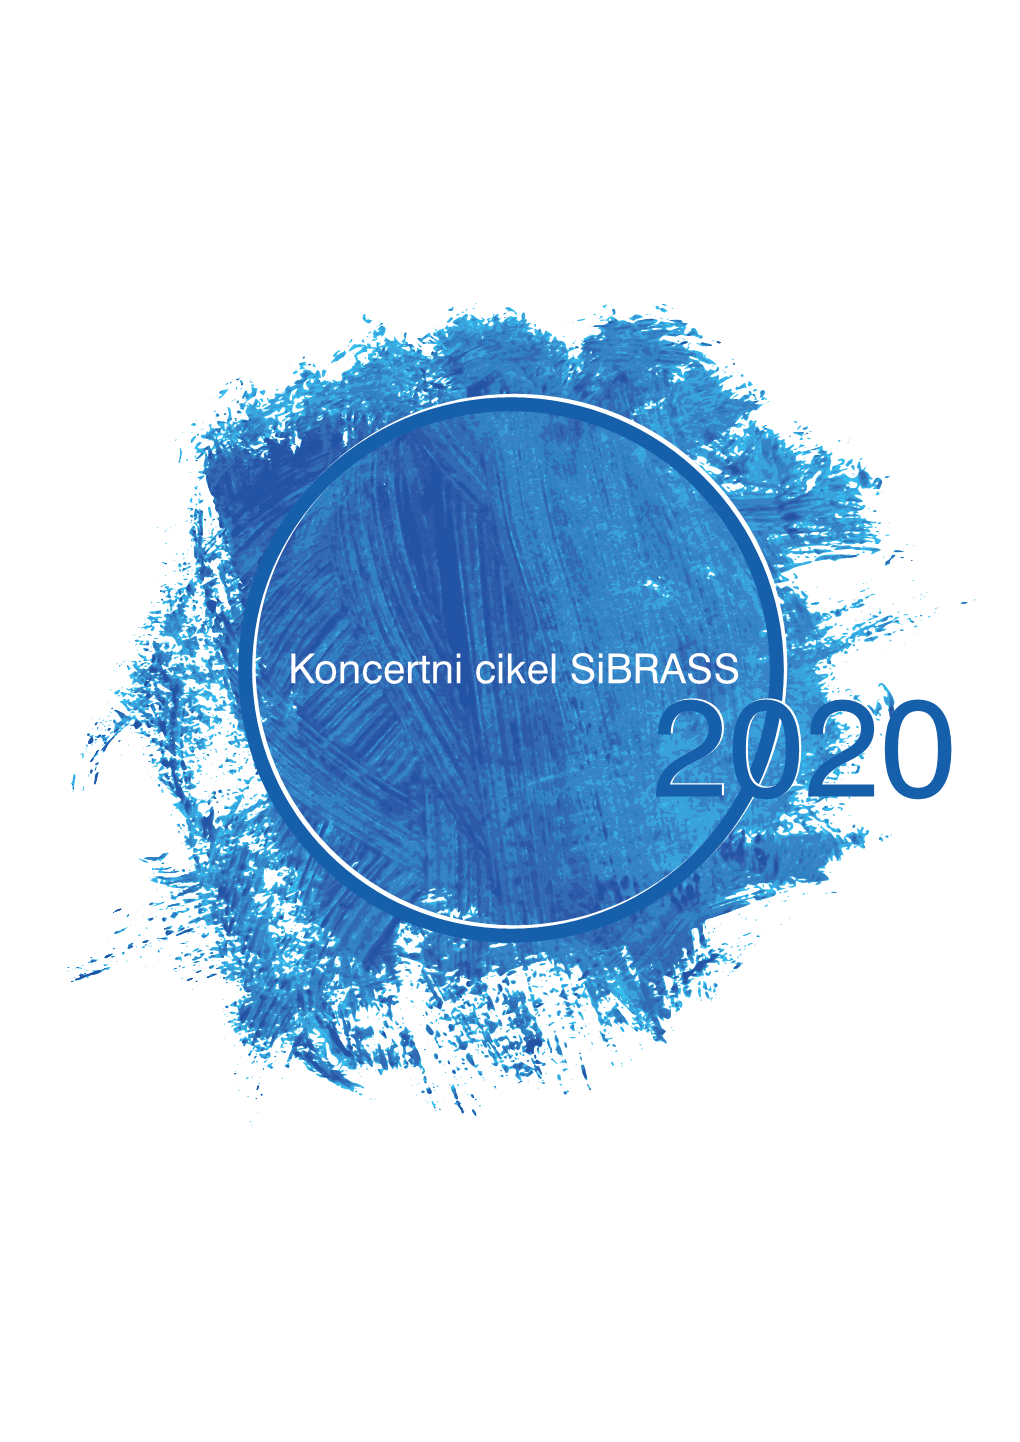 Koncertni Cikel Sibrass 20202020 KONCERTNI CIKEL Sibrass 2020 Sibrass 2020 CONCERT CYCLE